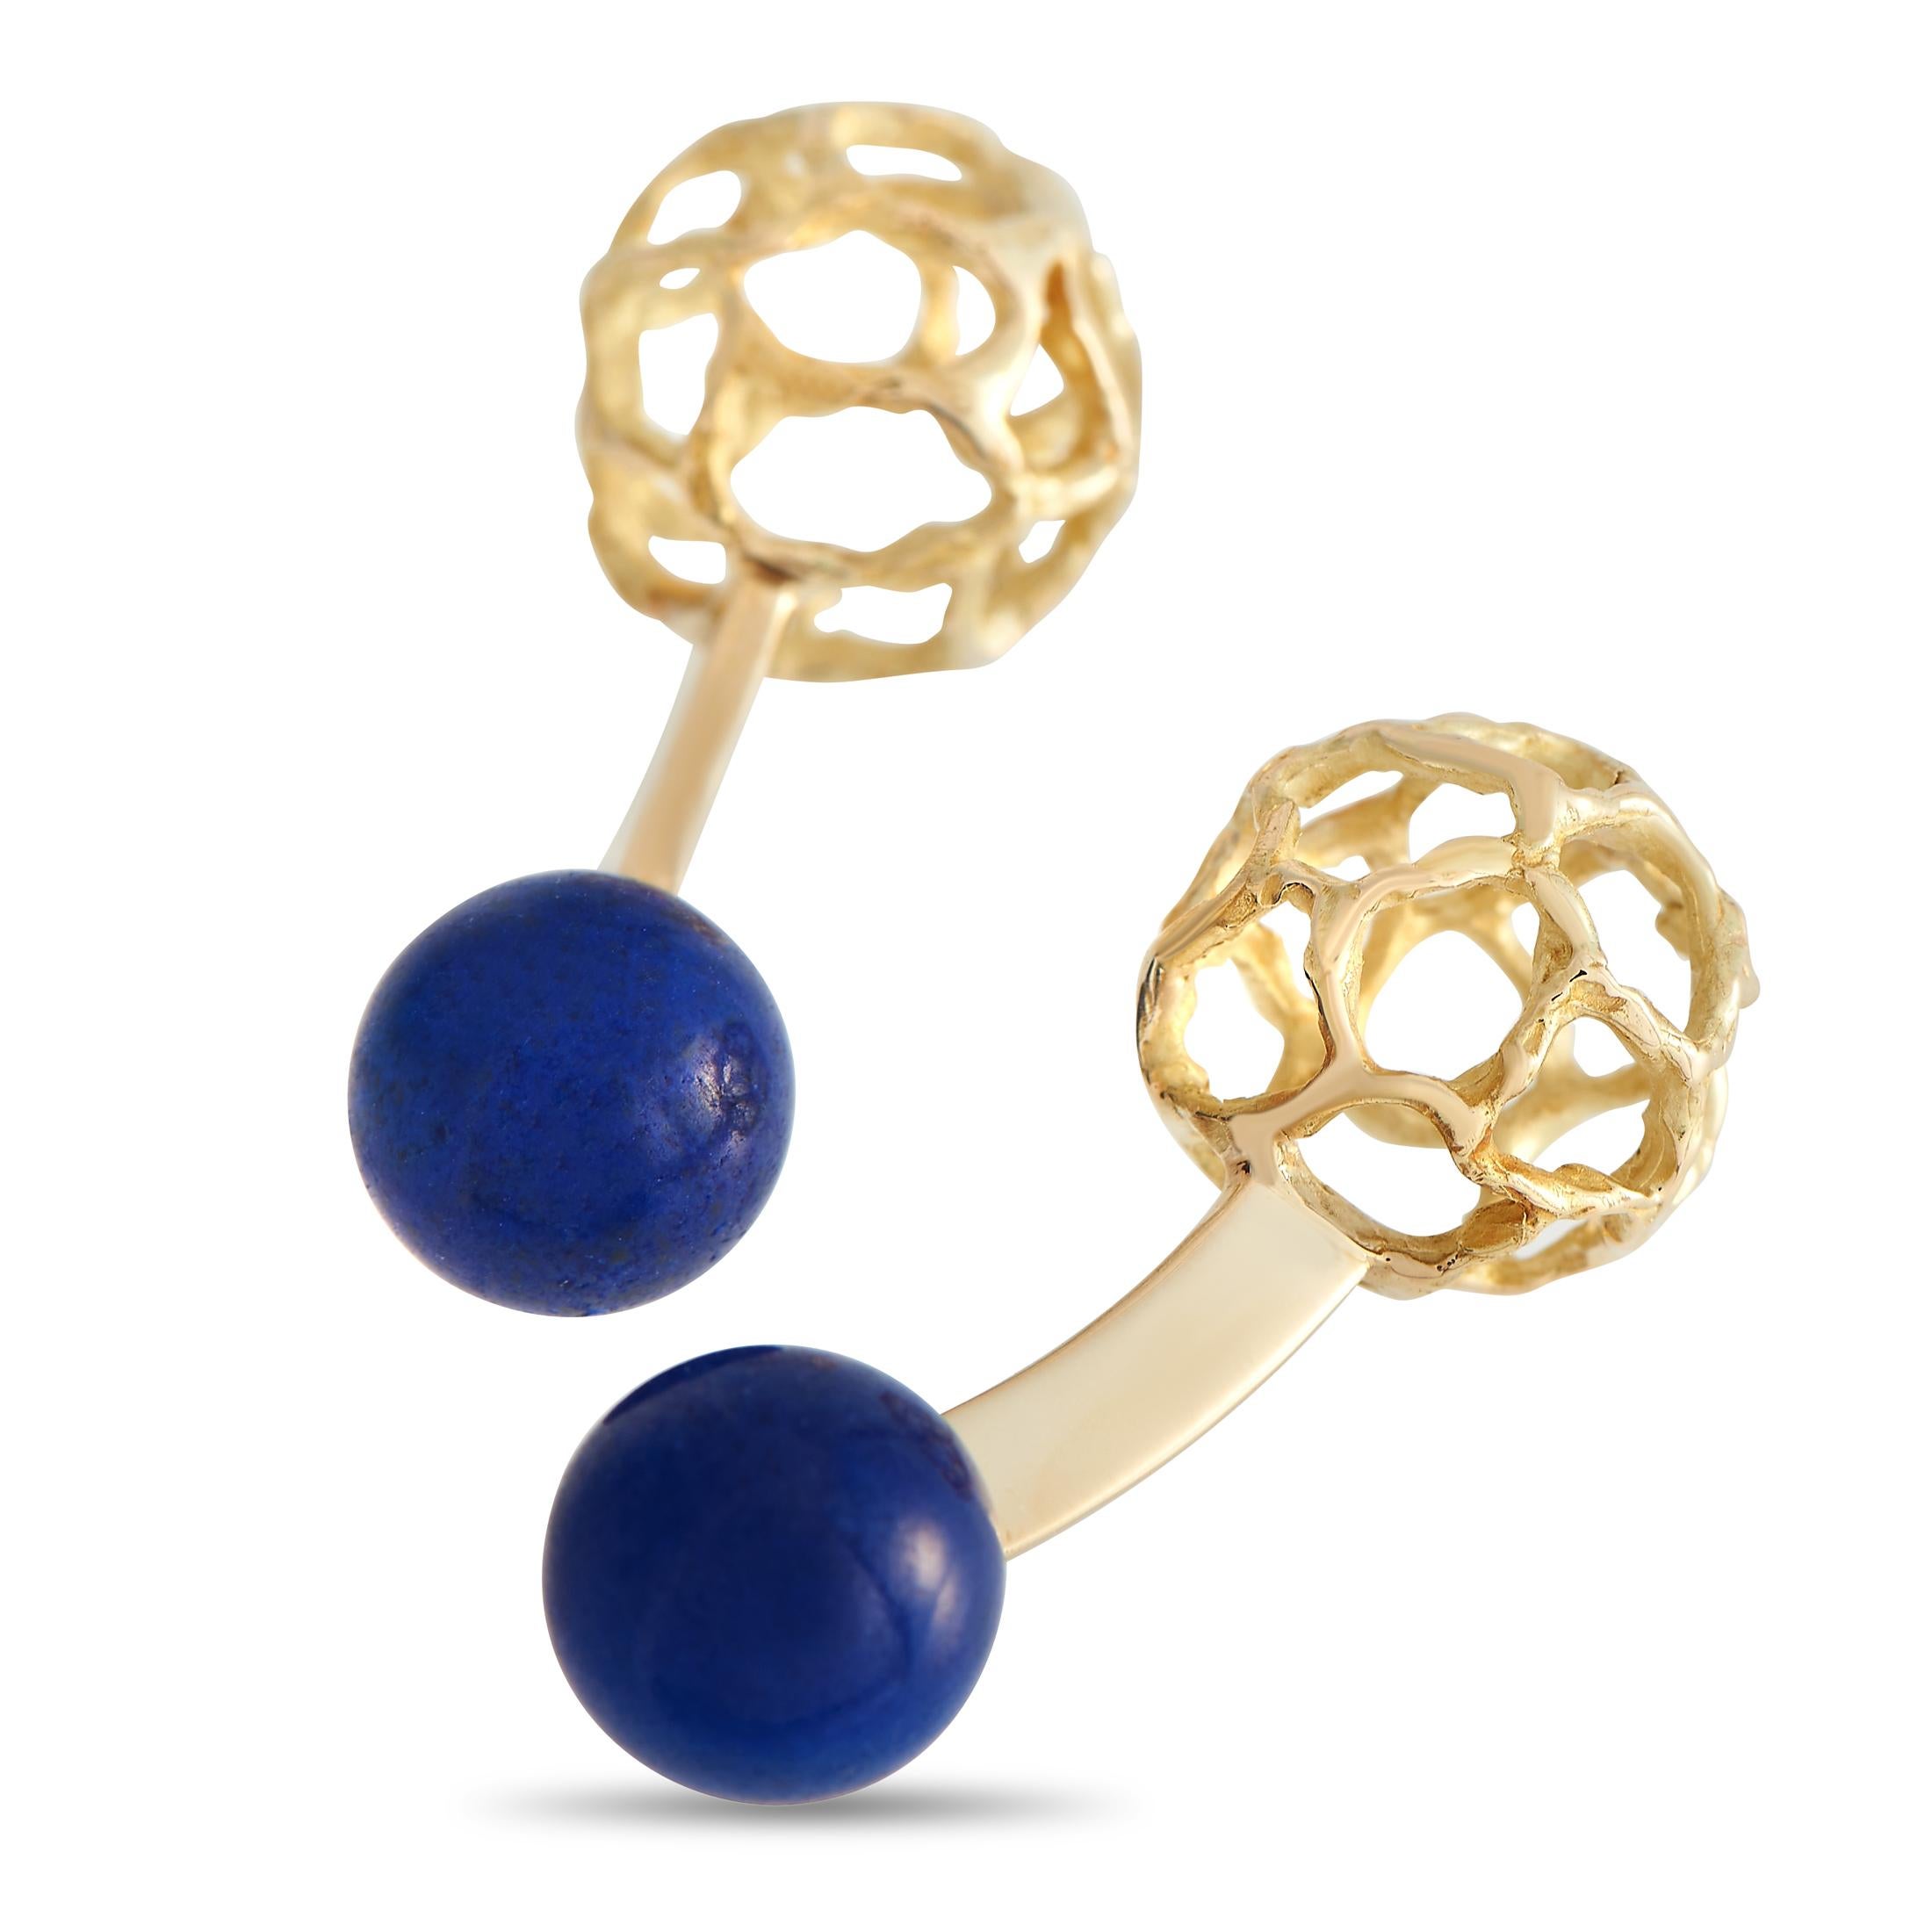 Take your style game up a notch with this Chaumet 18K Yellow Gold Lapis Lazuli Cufflinks. Secure your dress shirt elegantly using this functional and ornamental pair of men's jewelry. These ball return cufflinks are made from 18K yellow gold with a